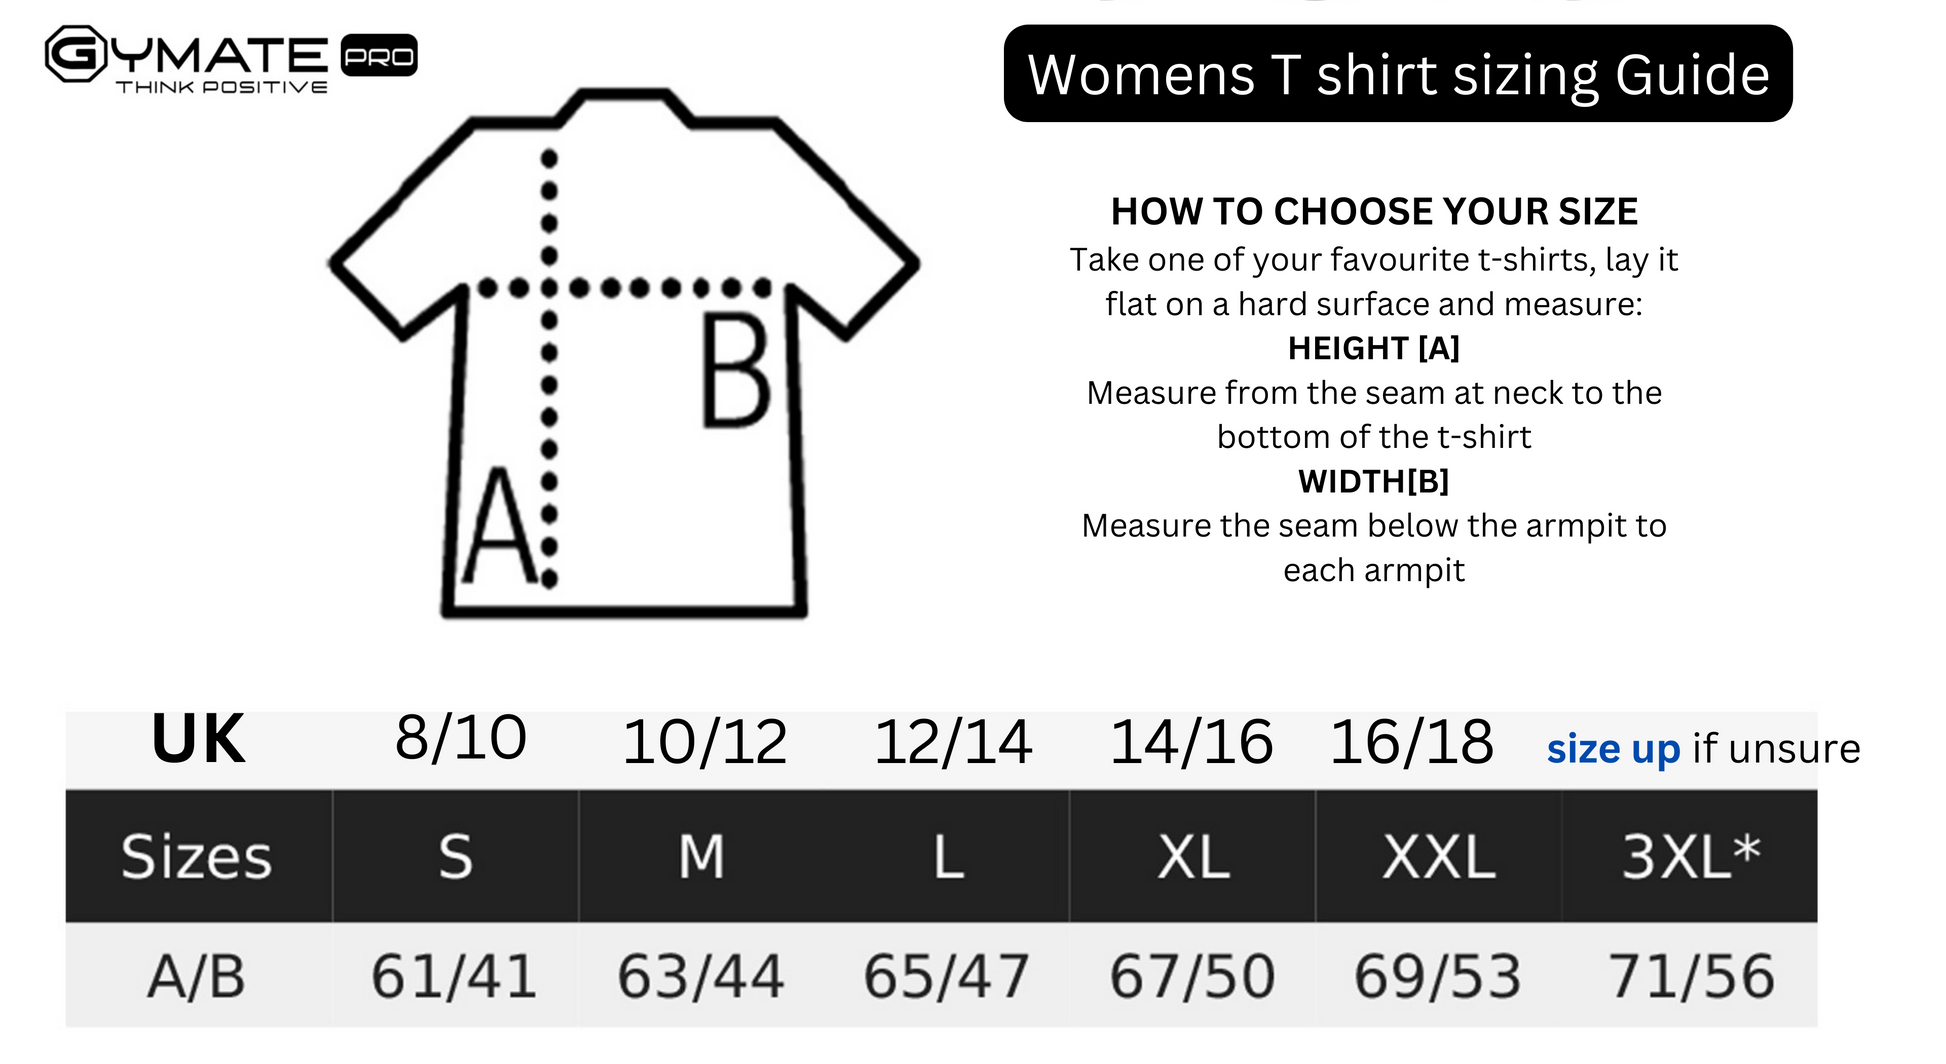 designer t shirts for women activewear in White with small logo Gymate logo size chart